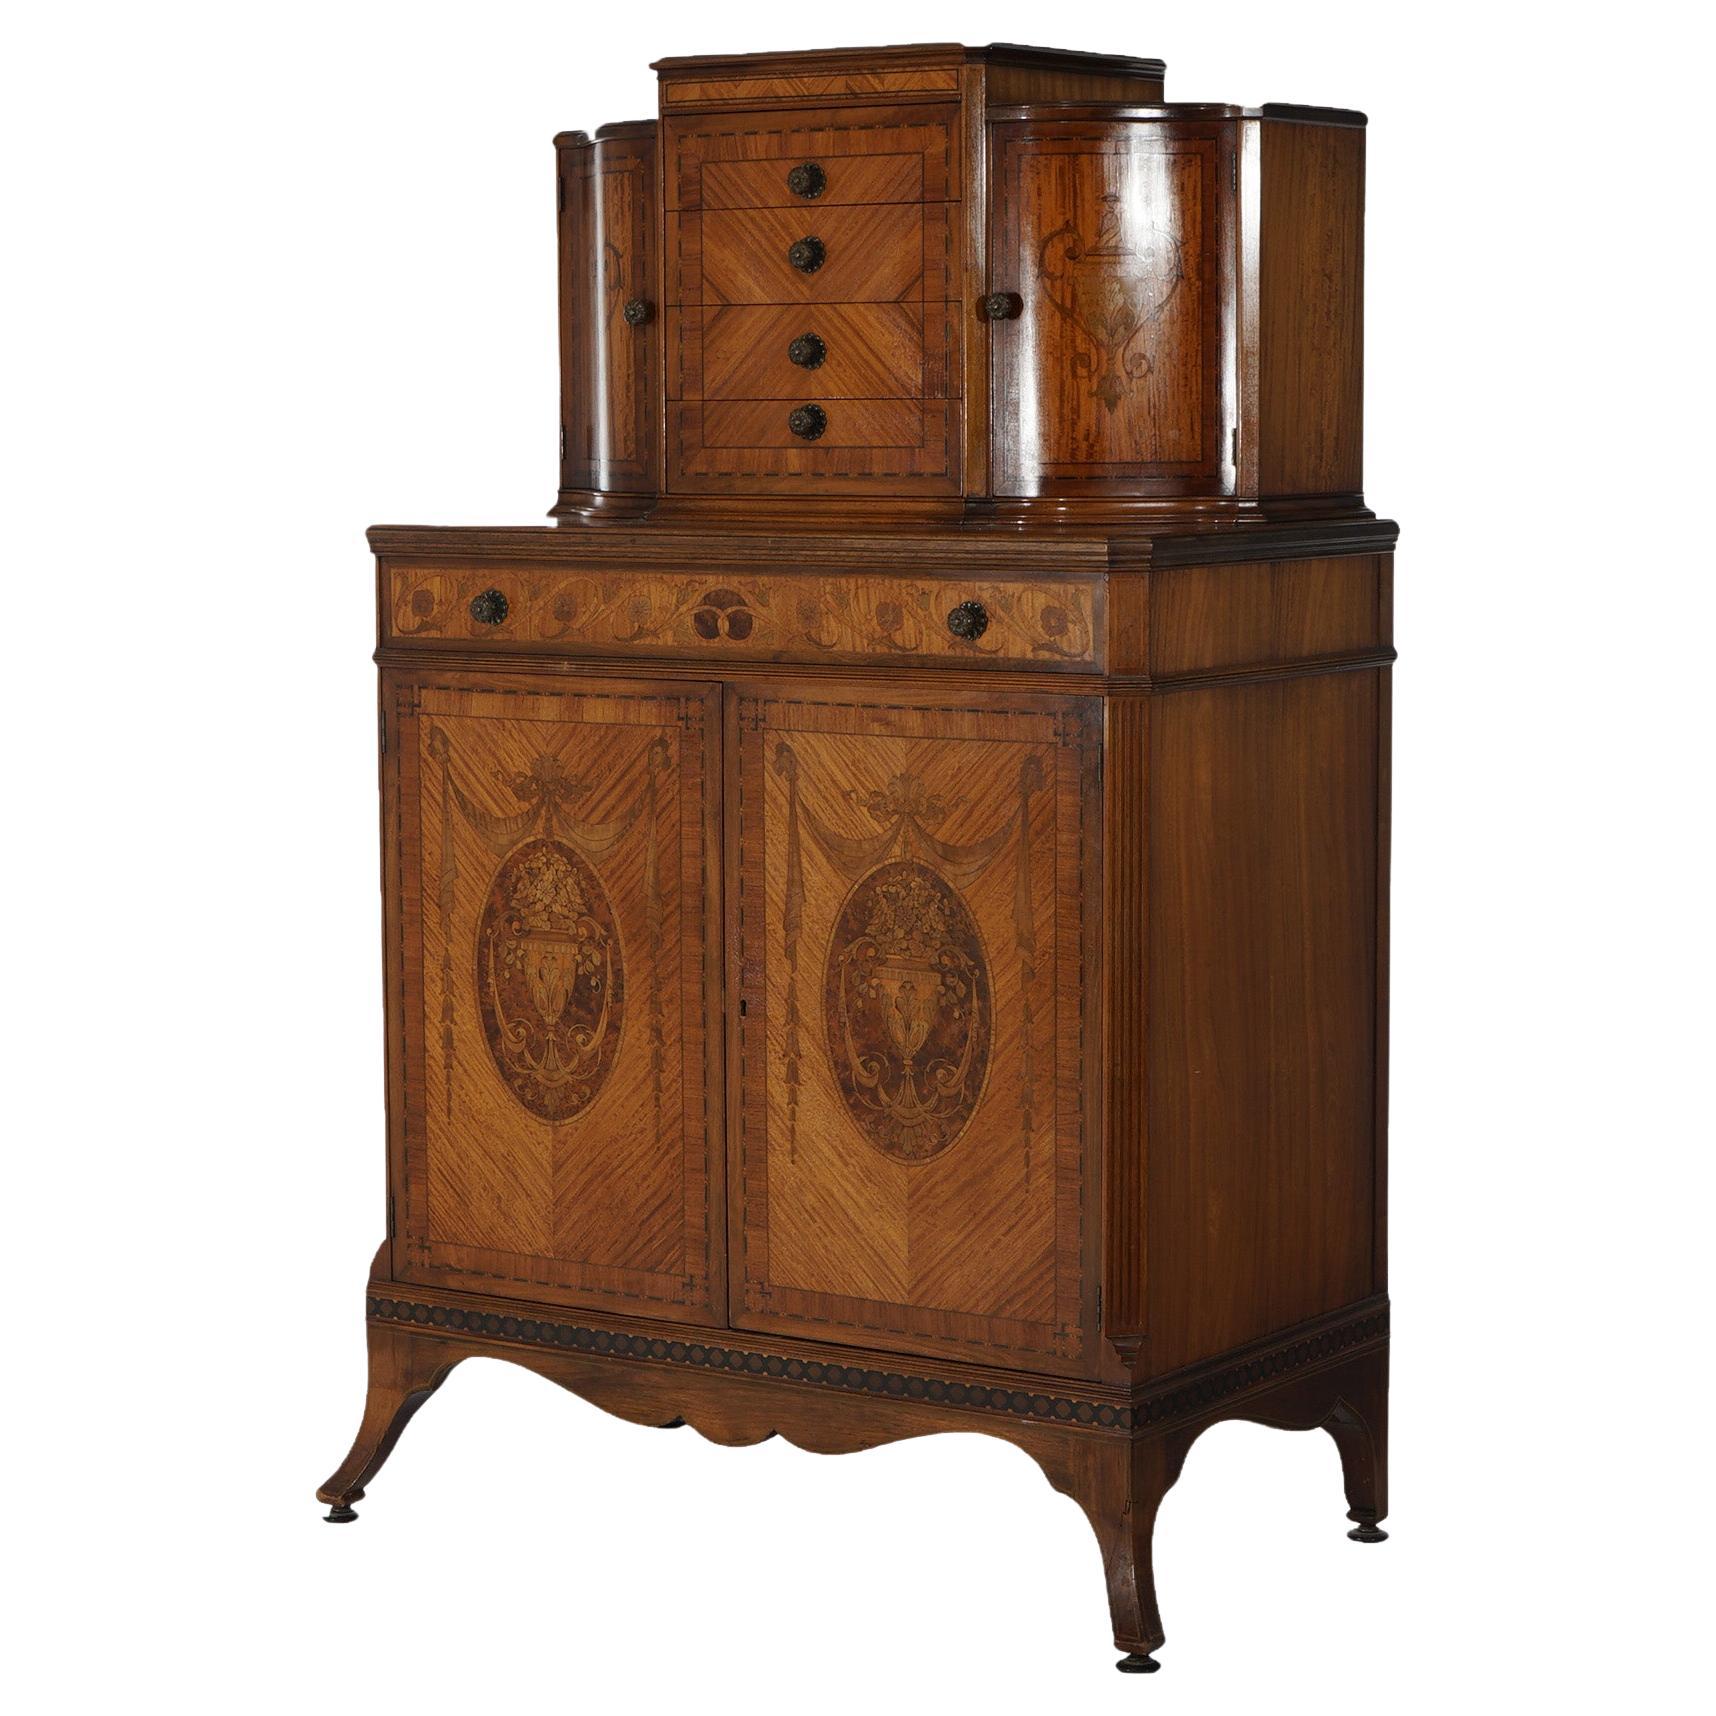 Antique Johnson Furniture Co. Satinwood & Mahogany Marquetry Chifferobe Dresser For Sale